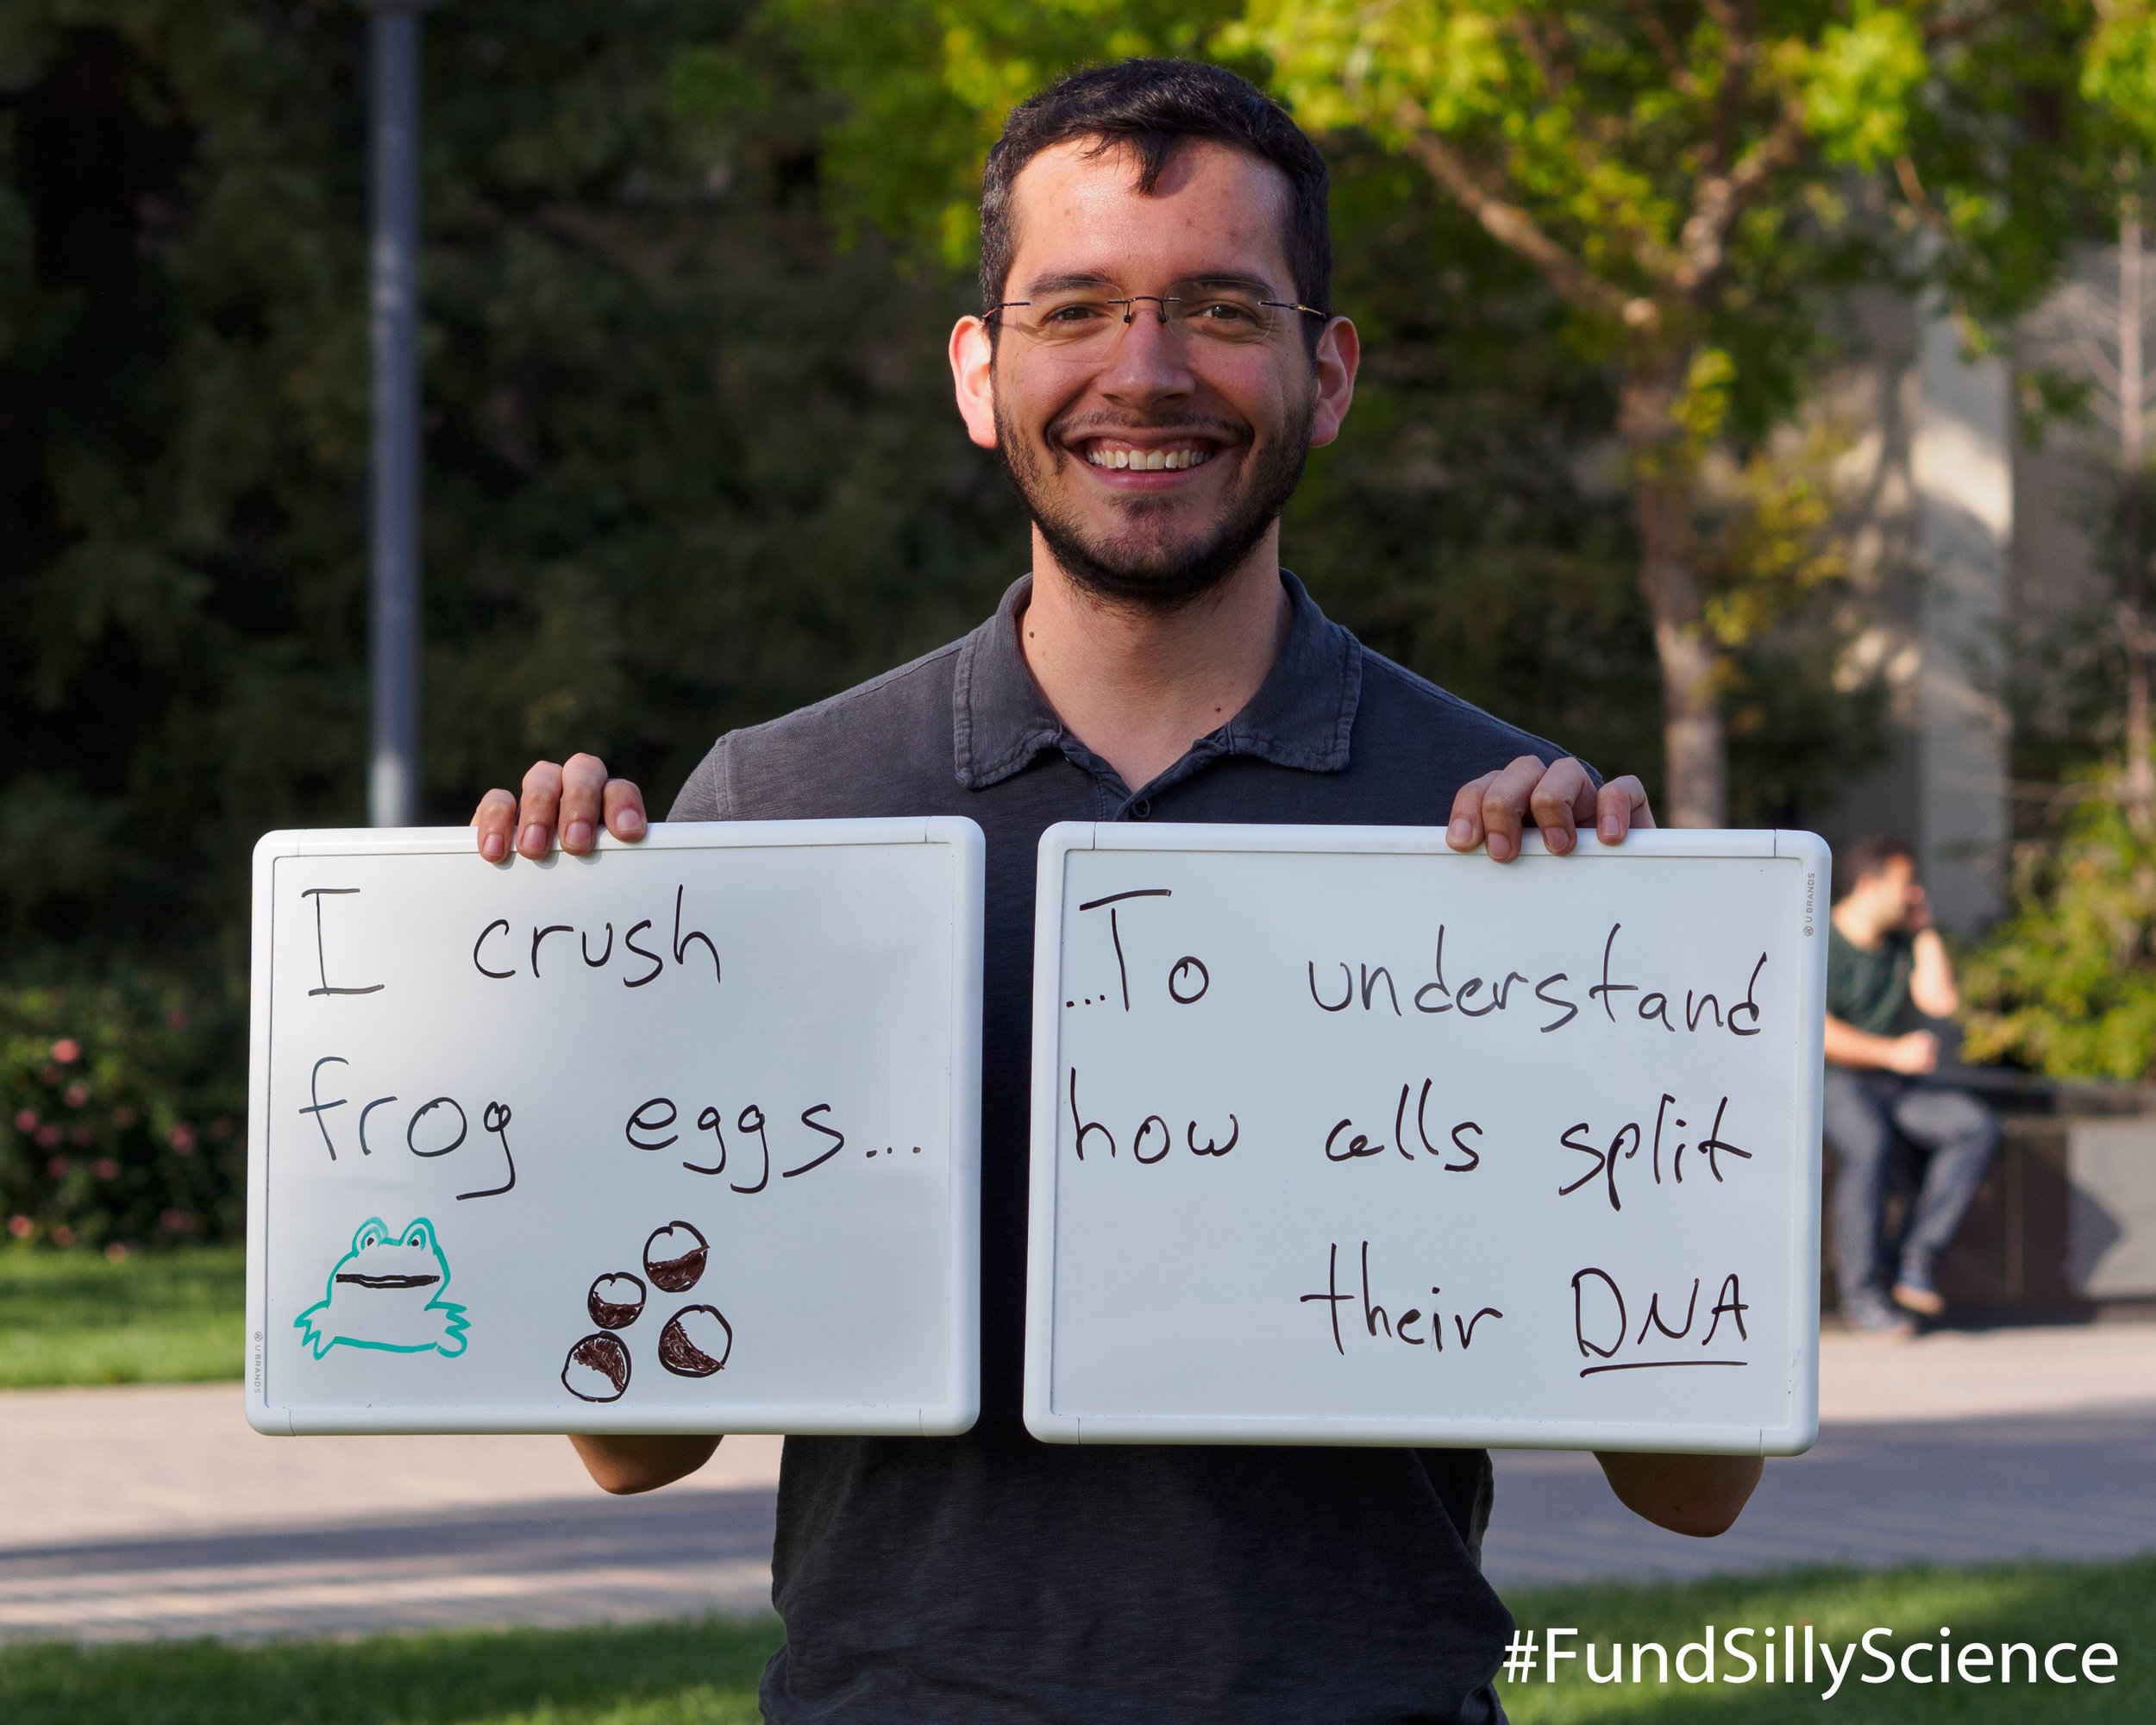  This is Julio, a graduate student at Stanford: “One of the goals of cell division is to replicate DNA and split it equally between the daughter cells. Frog eggs contain all the materials needed to imitate cell division in a test tube if we just add 